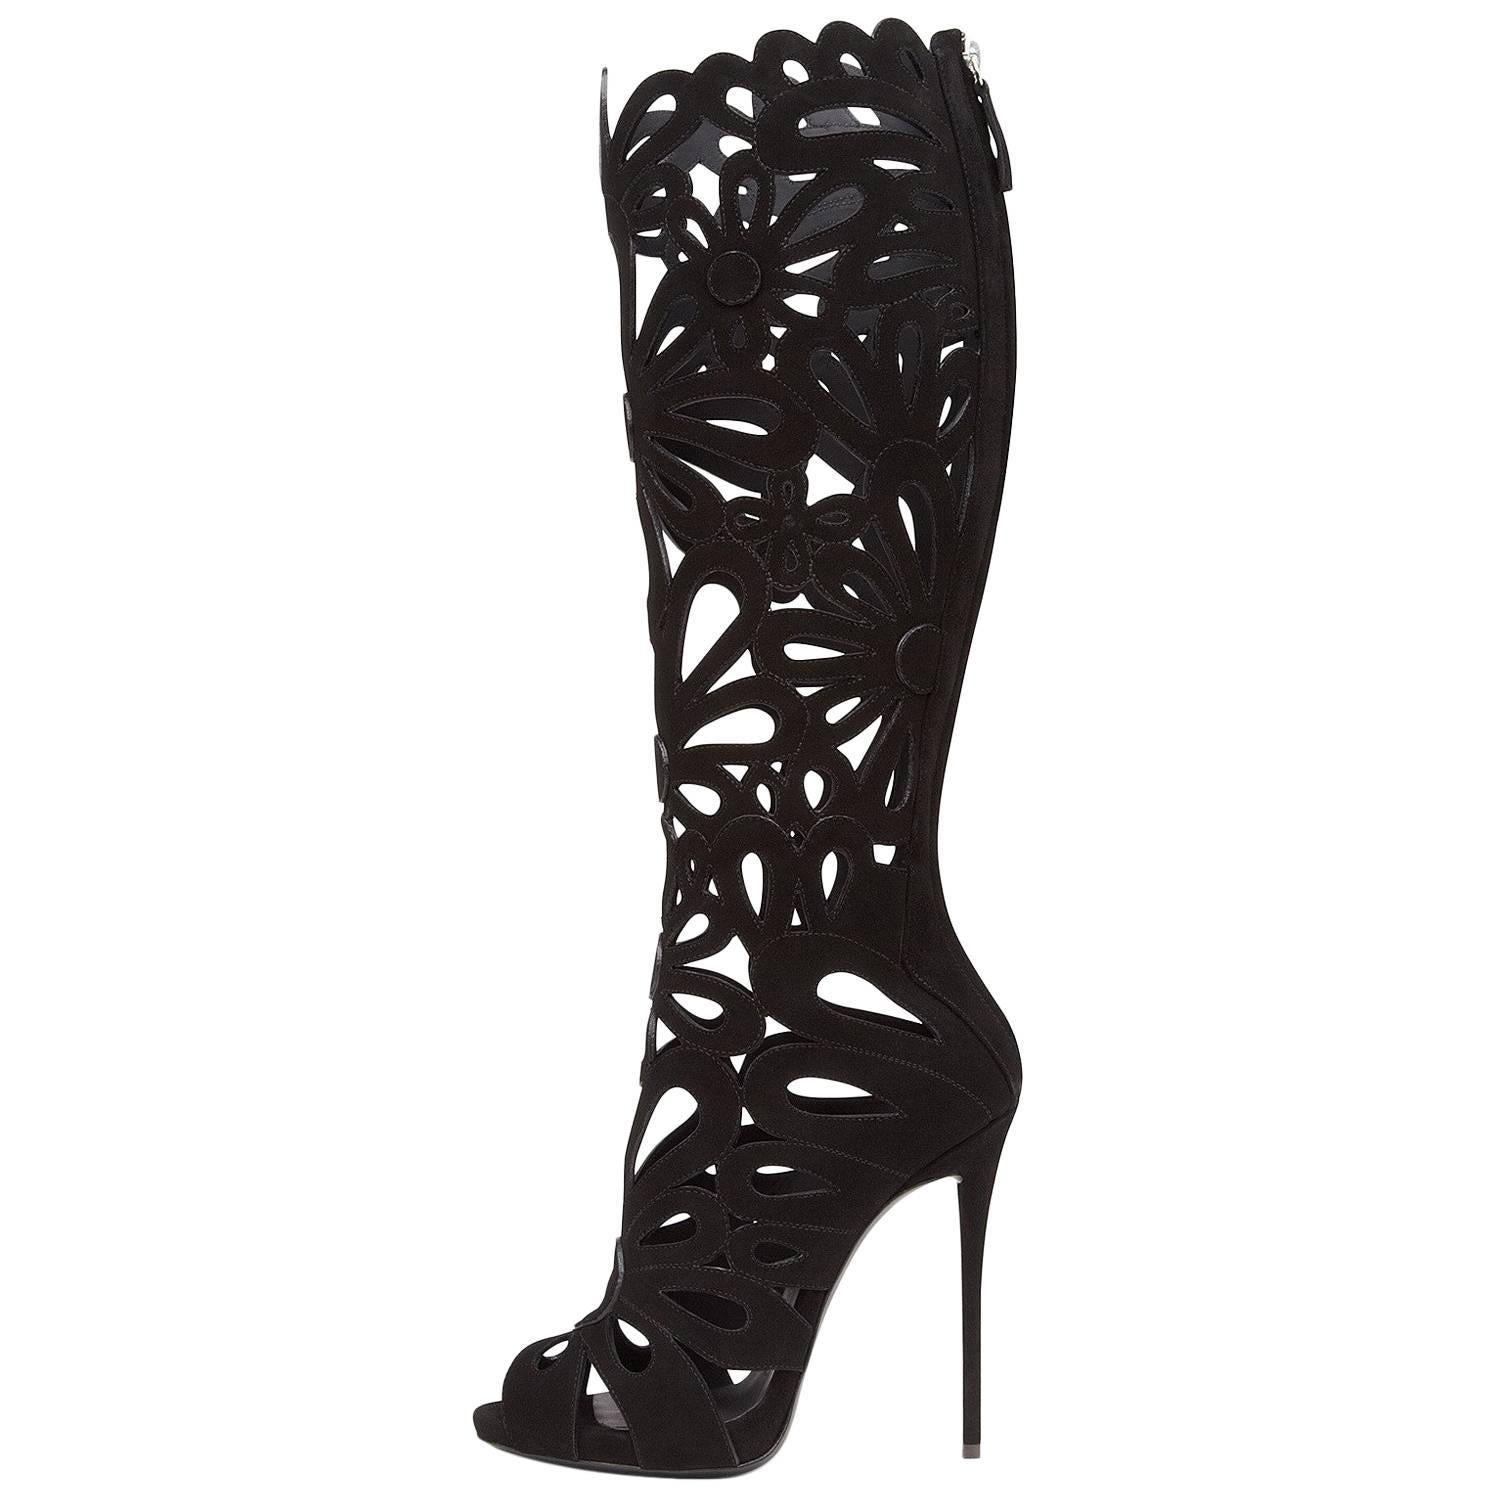 Giuseppe Zanotti New Sold Out Black Suede Lattice Cut Out Heels Boots in Box